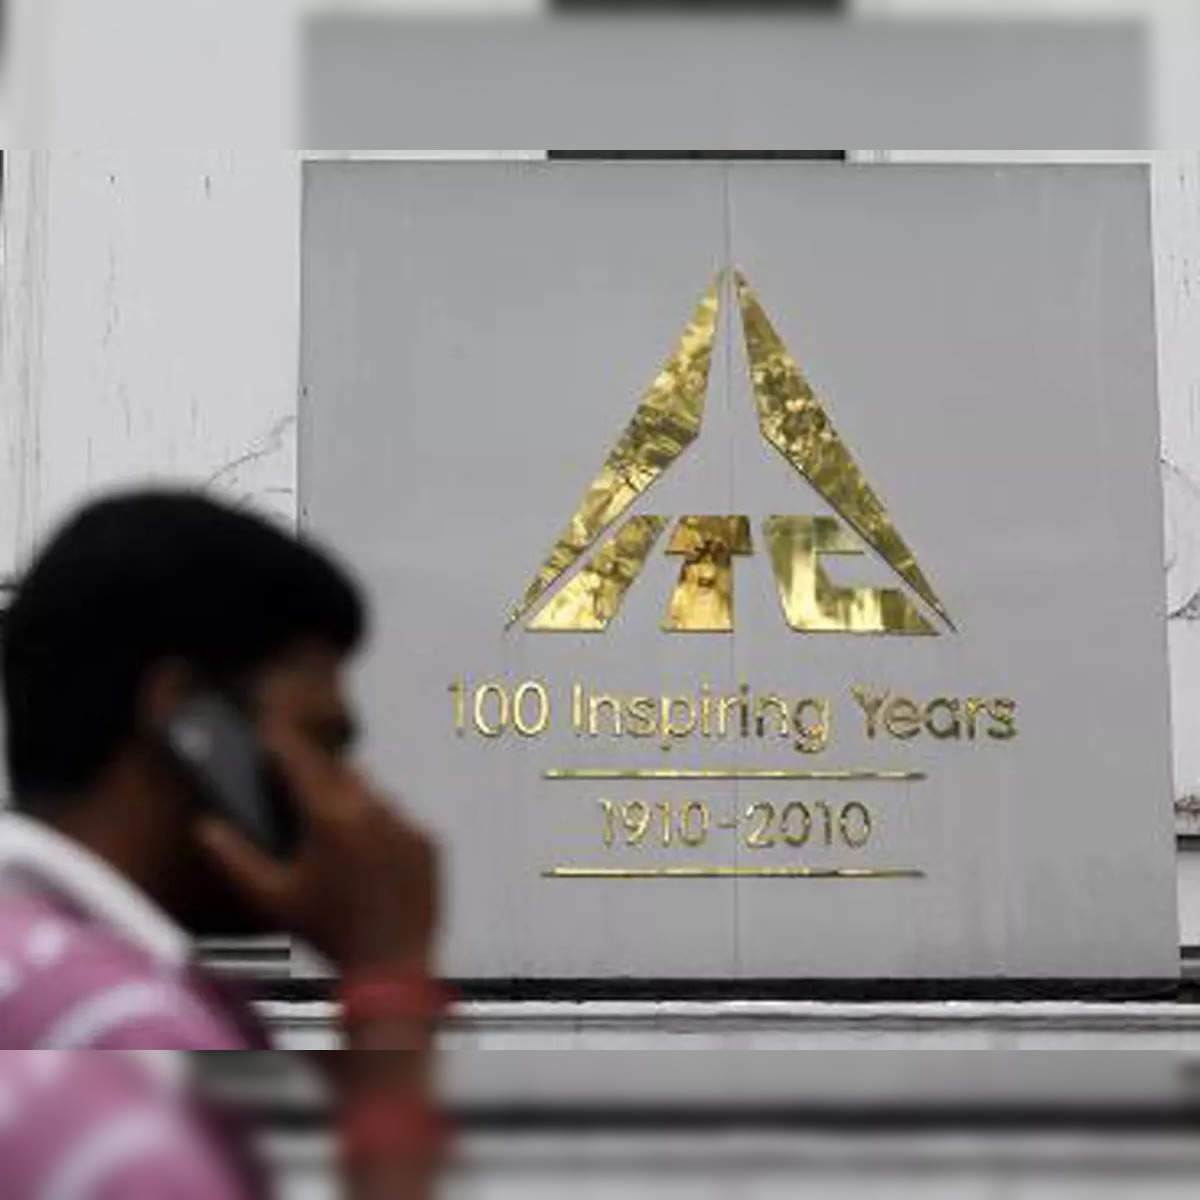 itc acquisition: ITC to acquire Yoga Bar to strengthen presence in